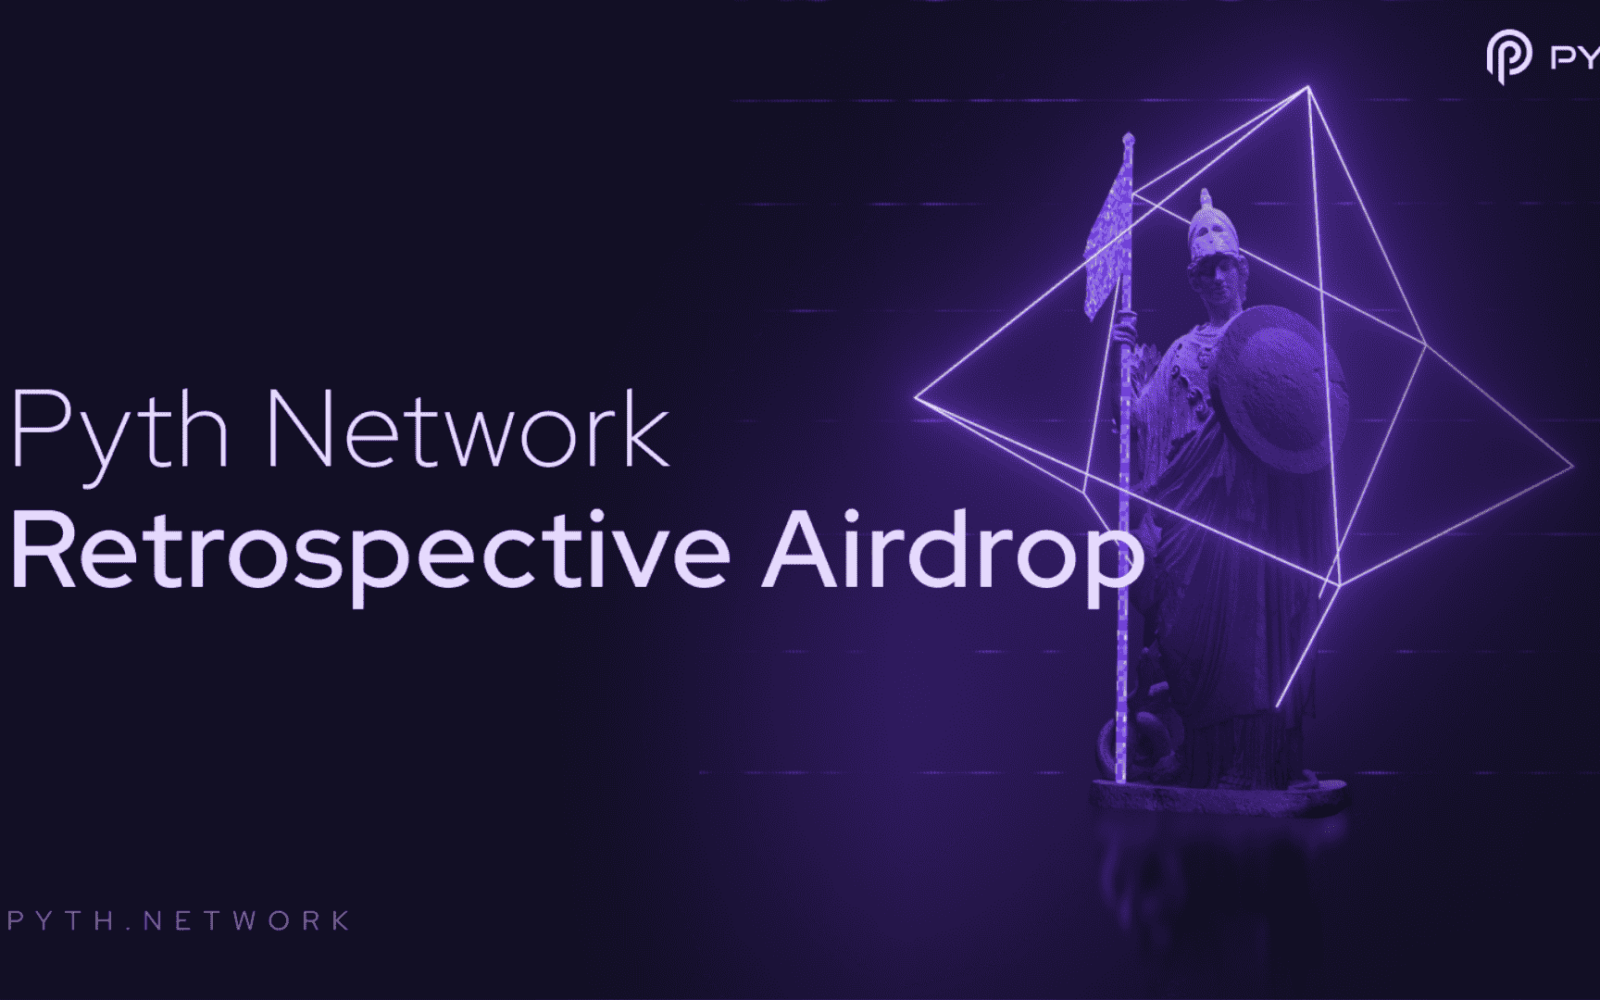 airdrop crypto pyth network guide